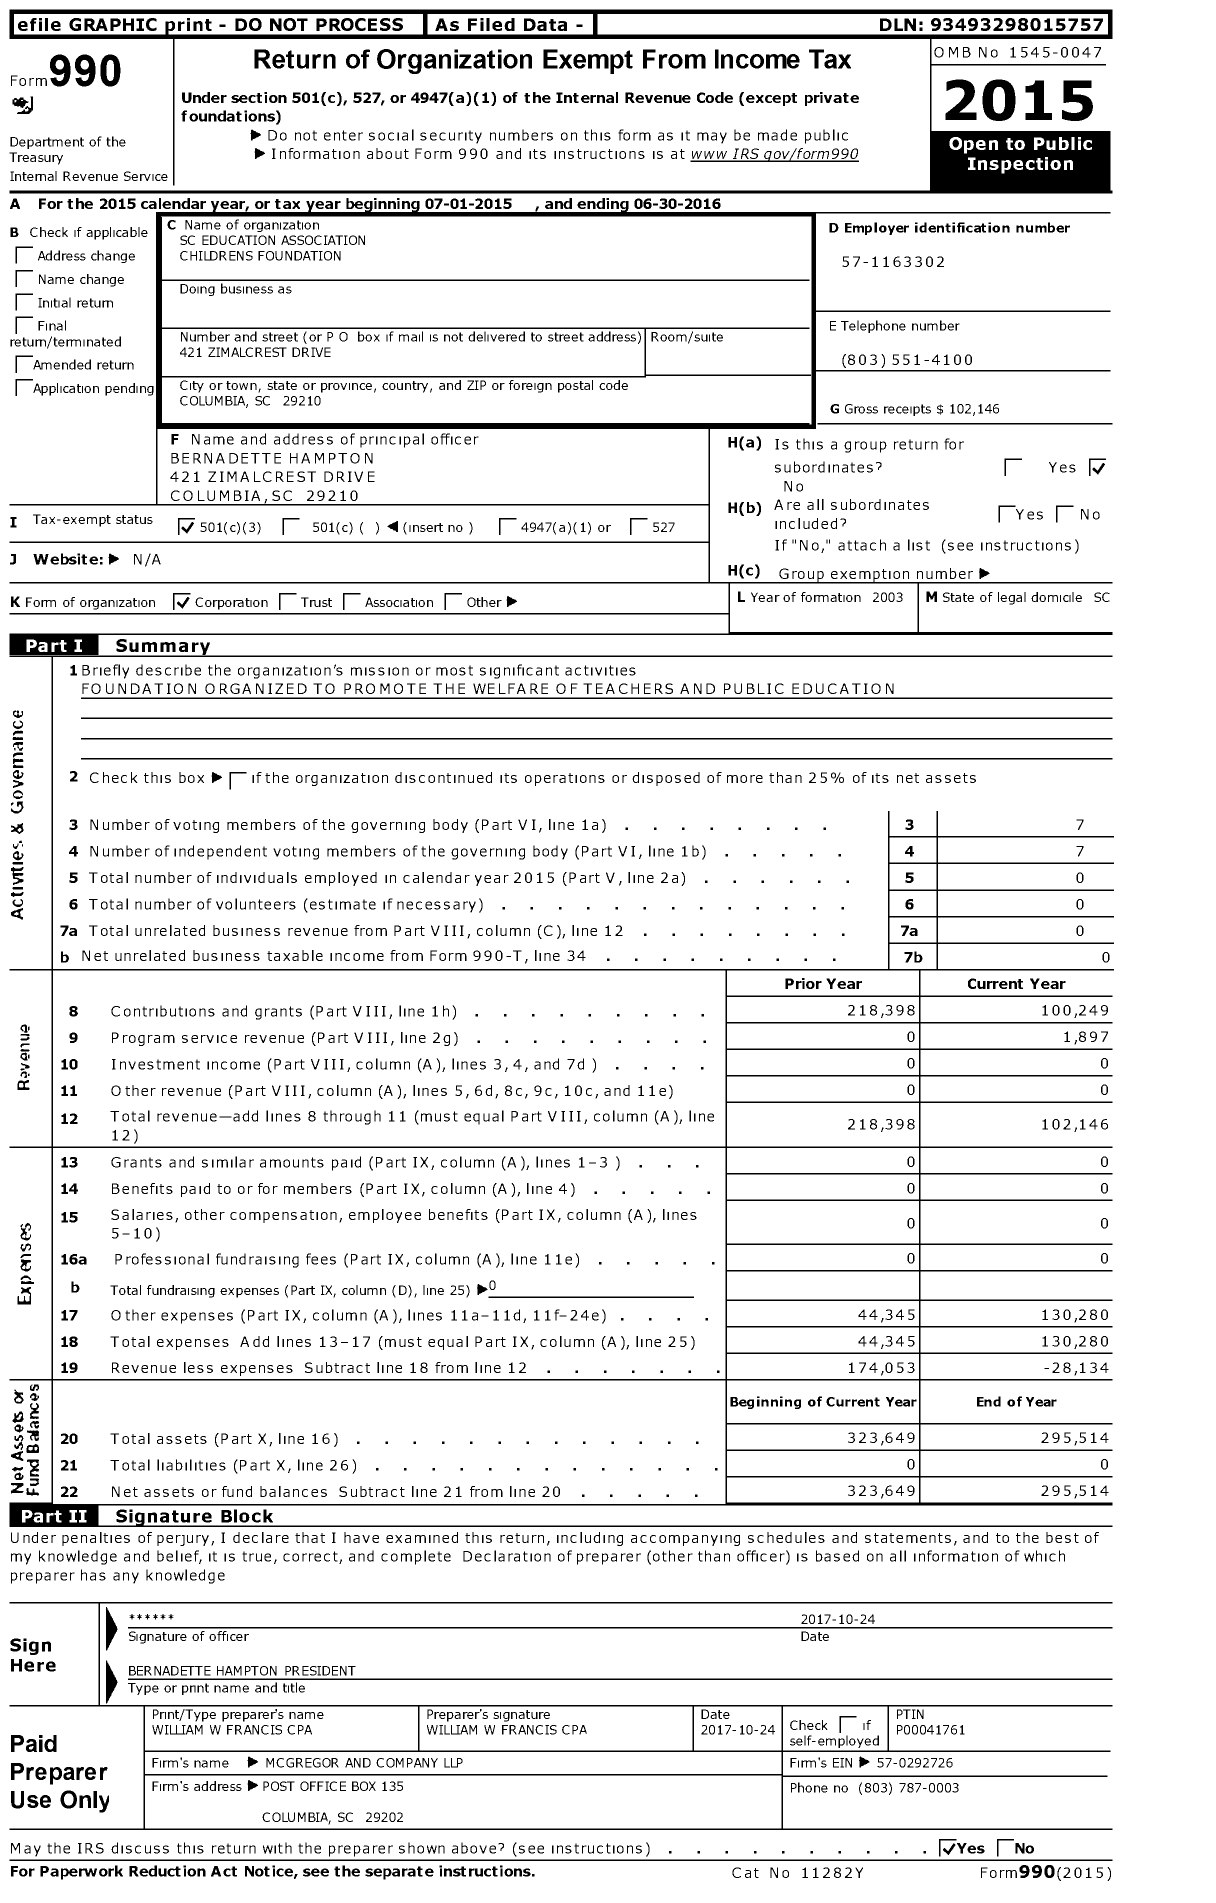 Image of first page of 2015 Form 990 for S C Education Association Childrens Foundation